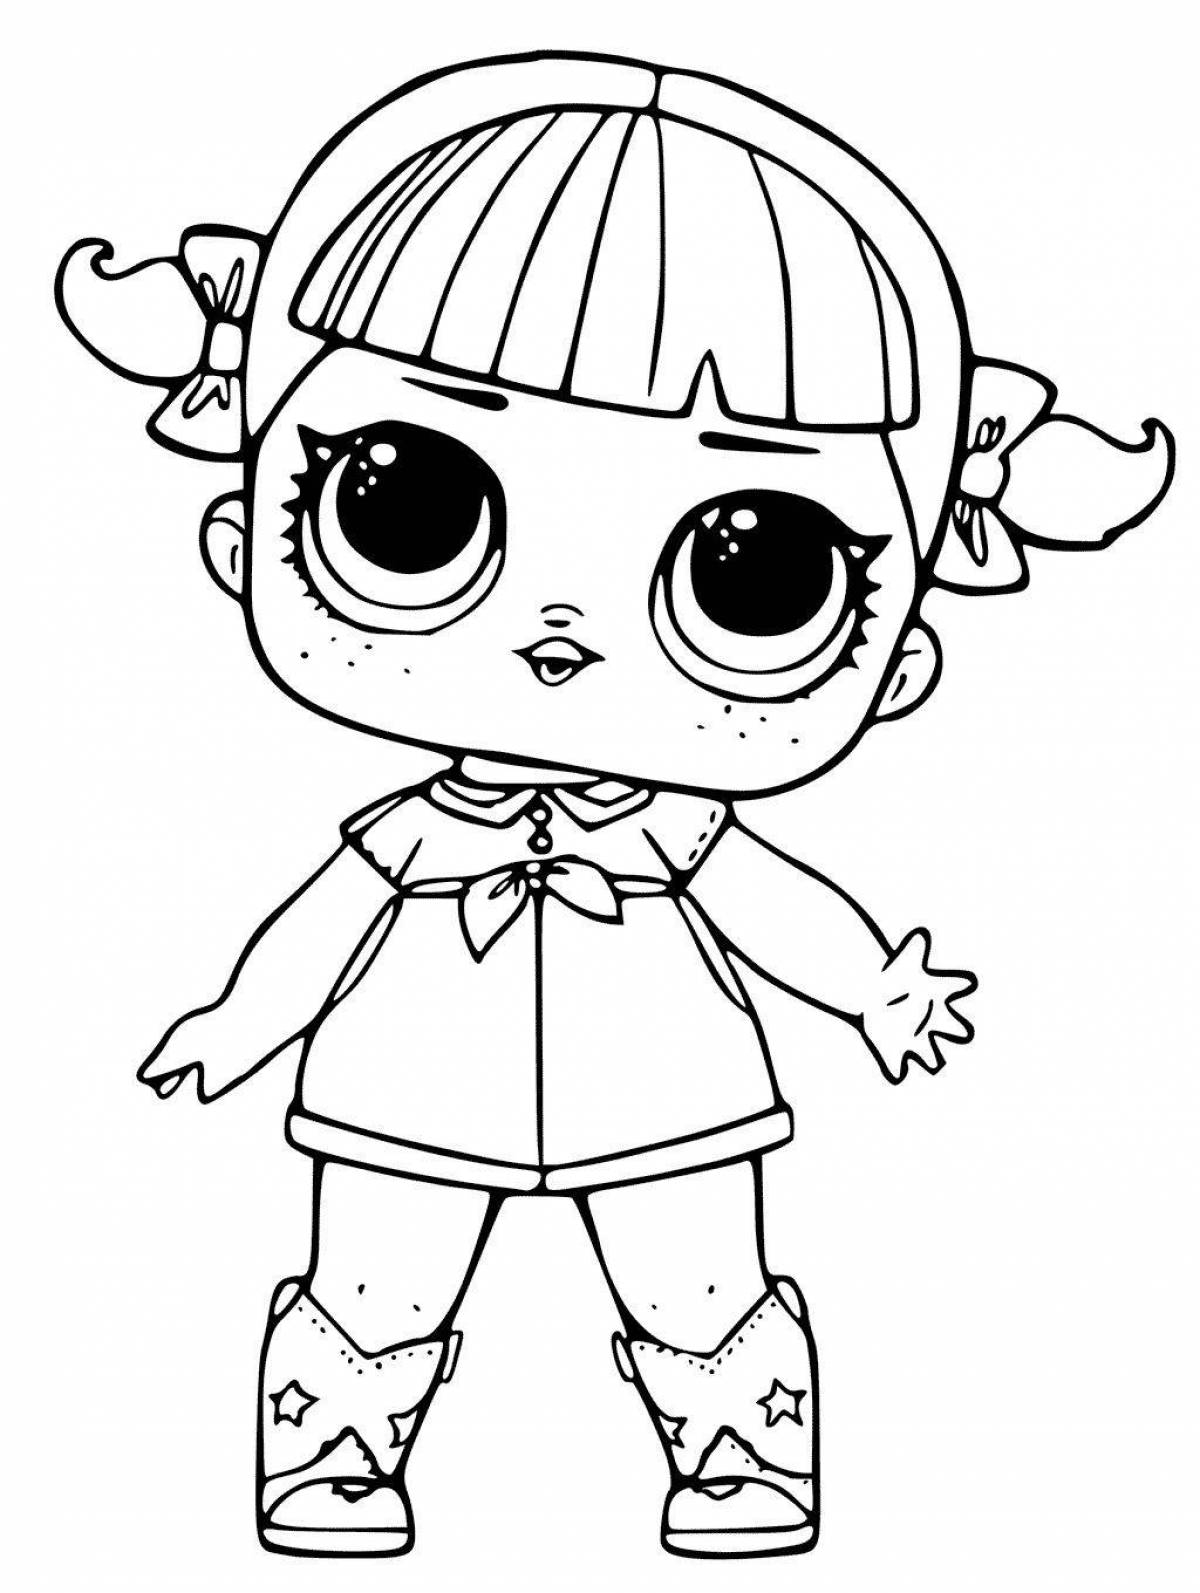 Exuberant coloring page lol doll black and white